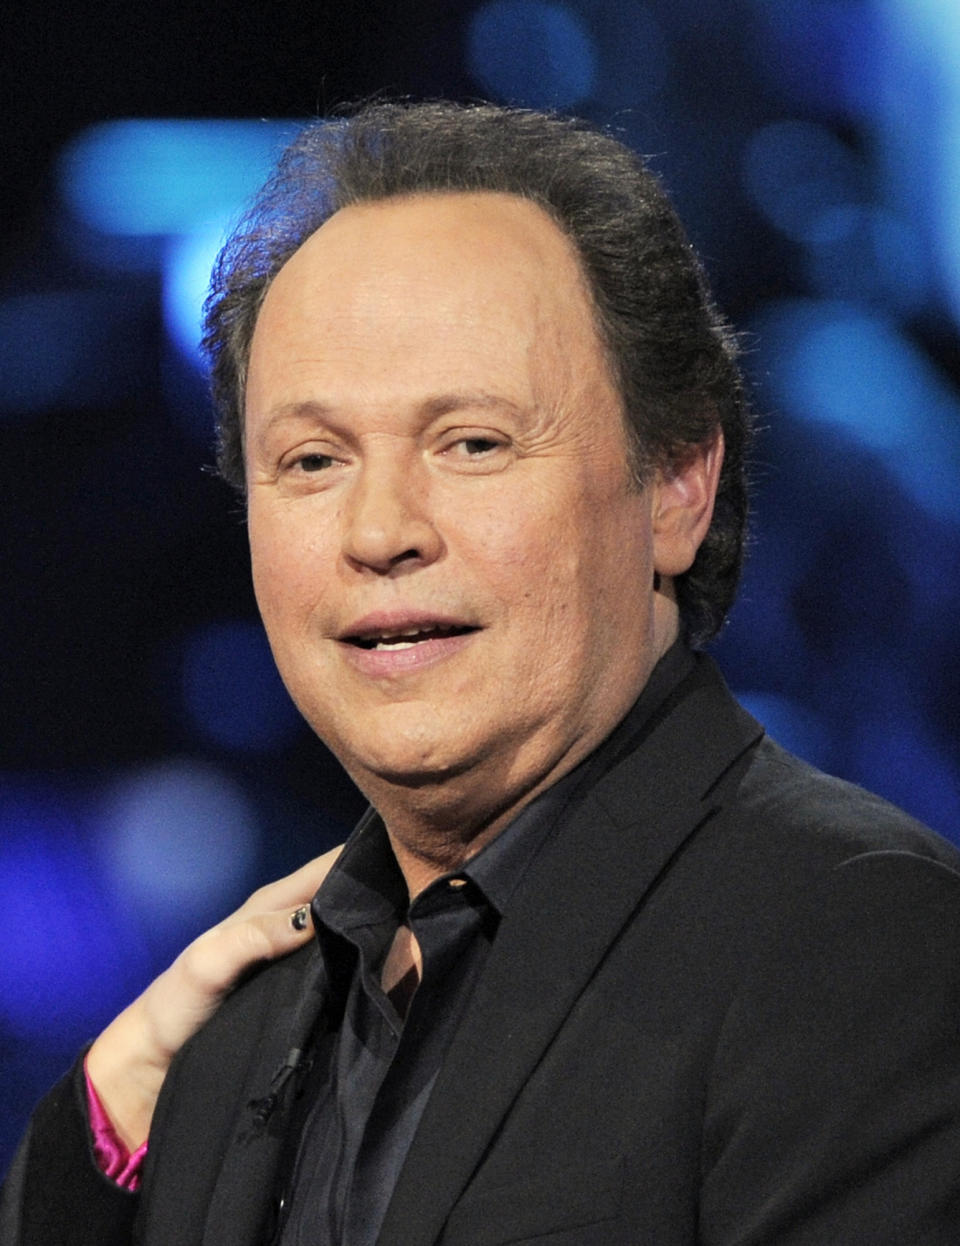 FILE - In this April 6, 2008 file photo, Billy Crystal is shown at the "Idol Gives Back" fundraising special of "American Idol" in Los Angeles. Actor Billy Crystal has helped raise $1 million to rebuild a beach town on New York's Long Island hard-hit by Superstorm Sandy, Saturday, June 22, 2013.(AP Photo/Mark J. Terrill, file)